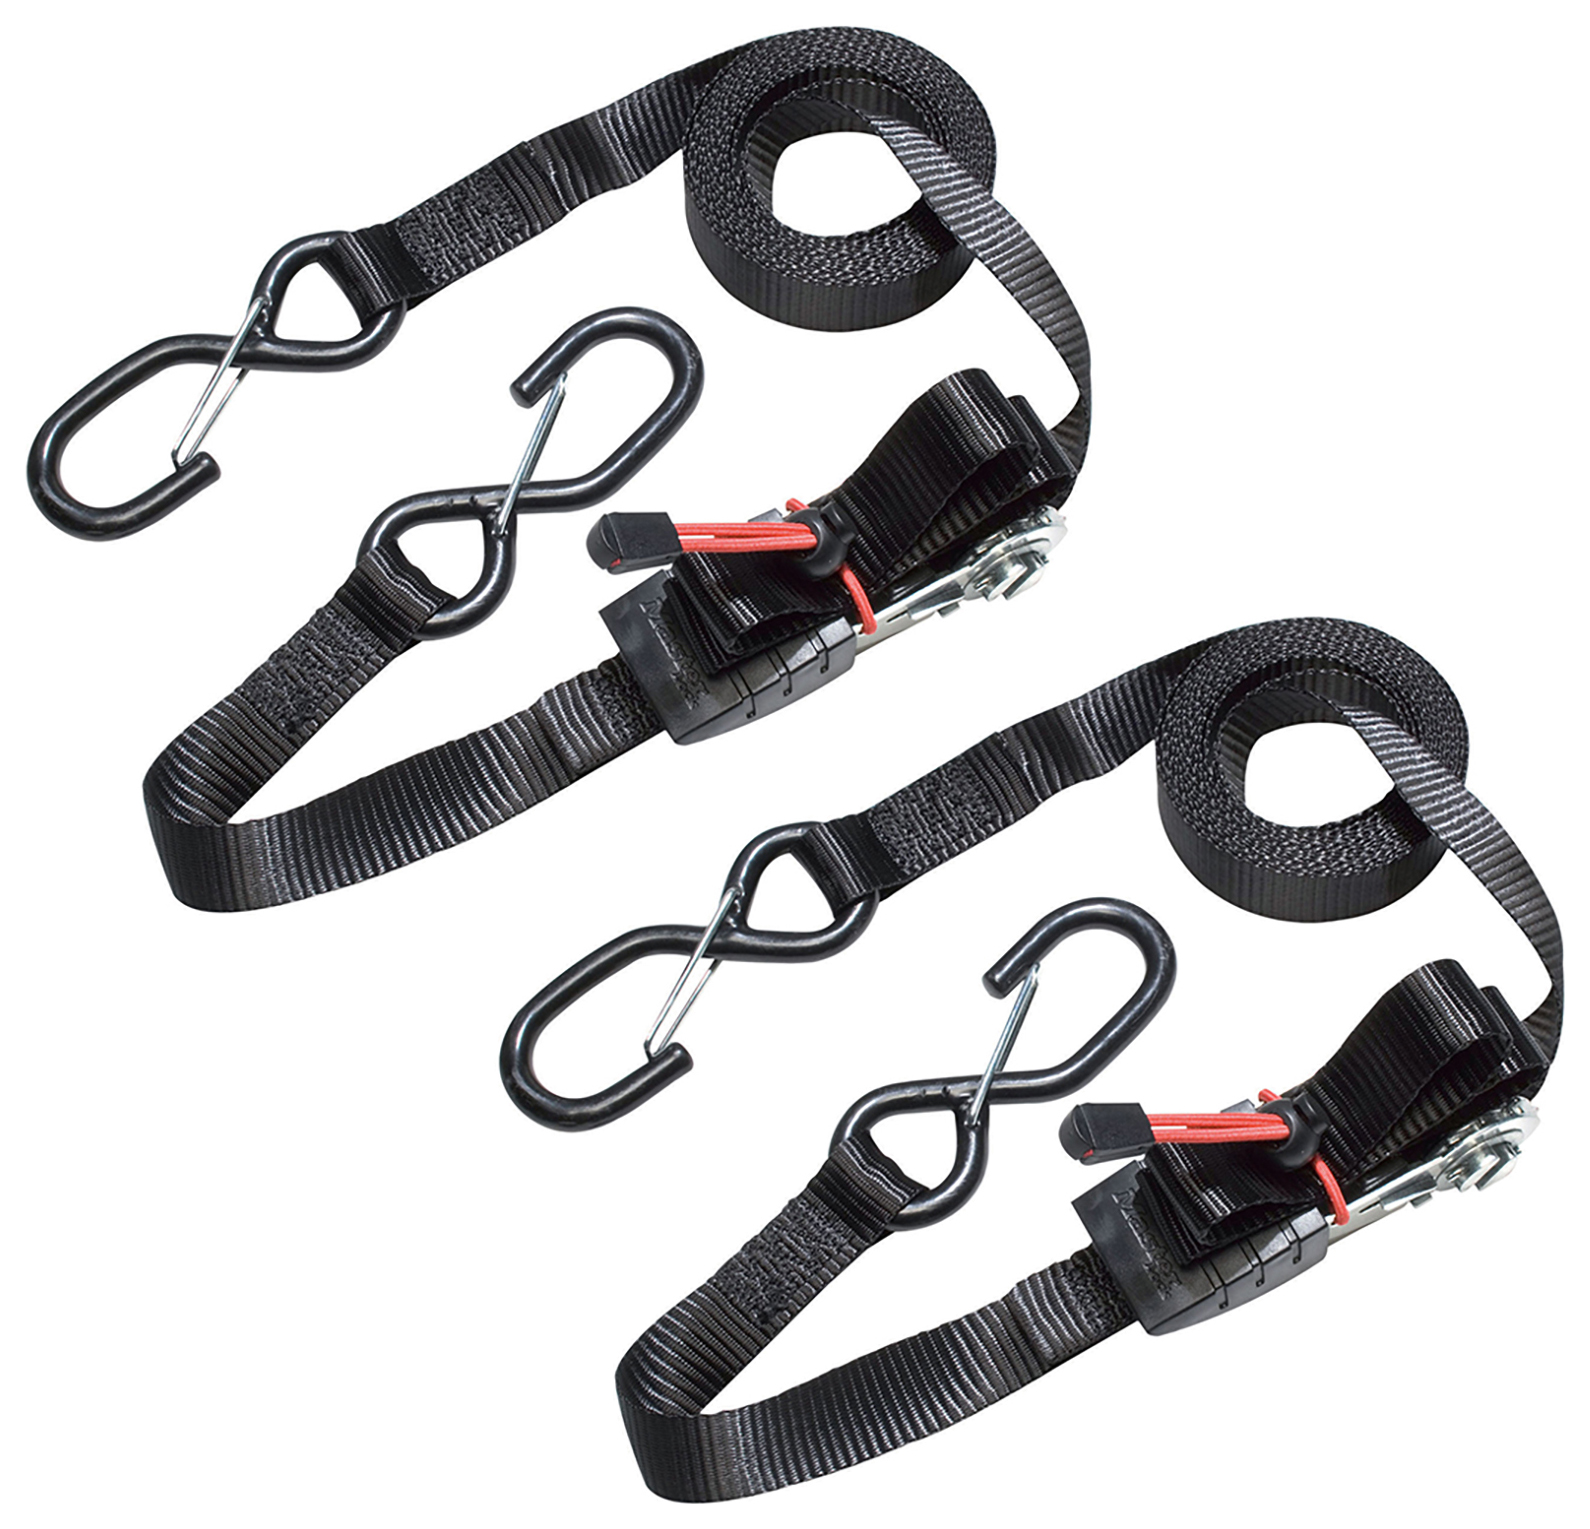 Master Lock Black Ratchet Tie Down Strap with S-Hooks - 4.25m x 25mm - Pack of 2